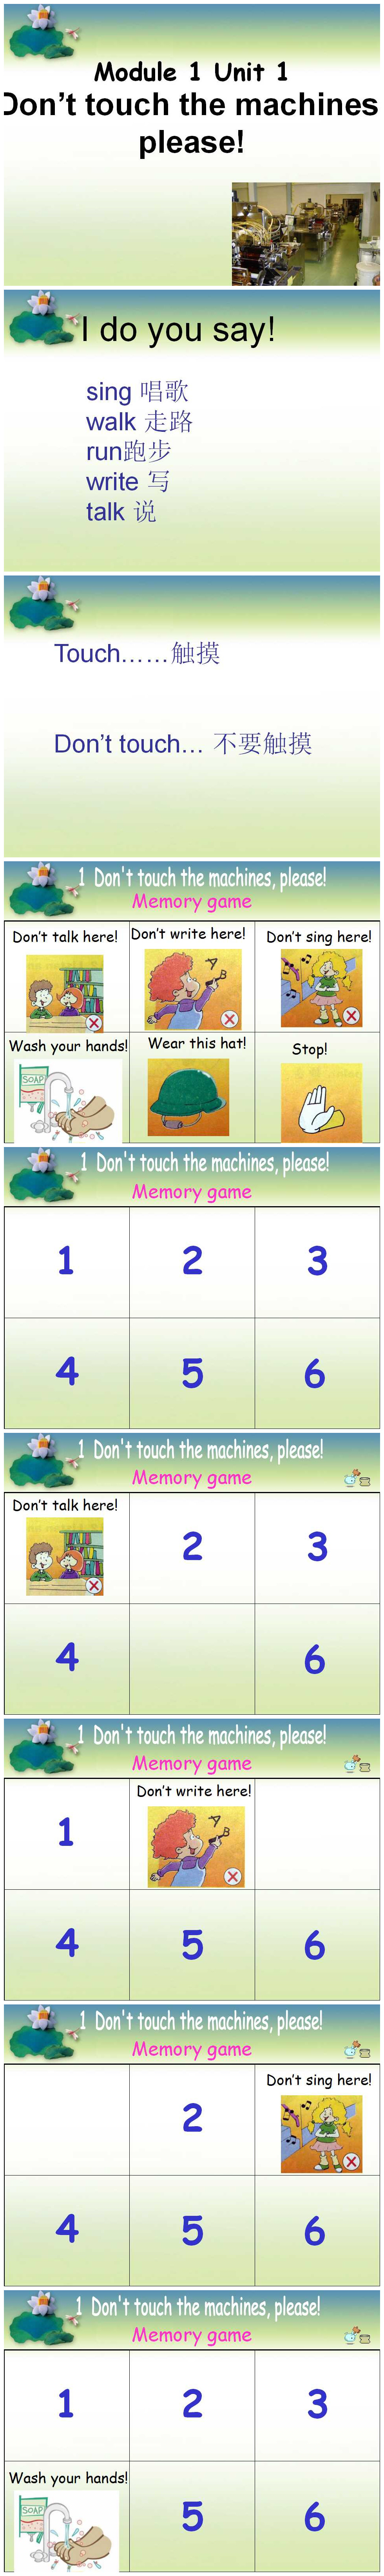 《Don't touch the machines,please!》PPT课件2PPT课件下载